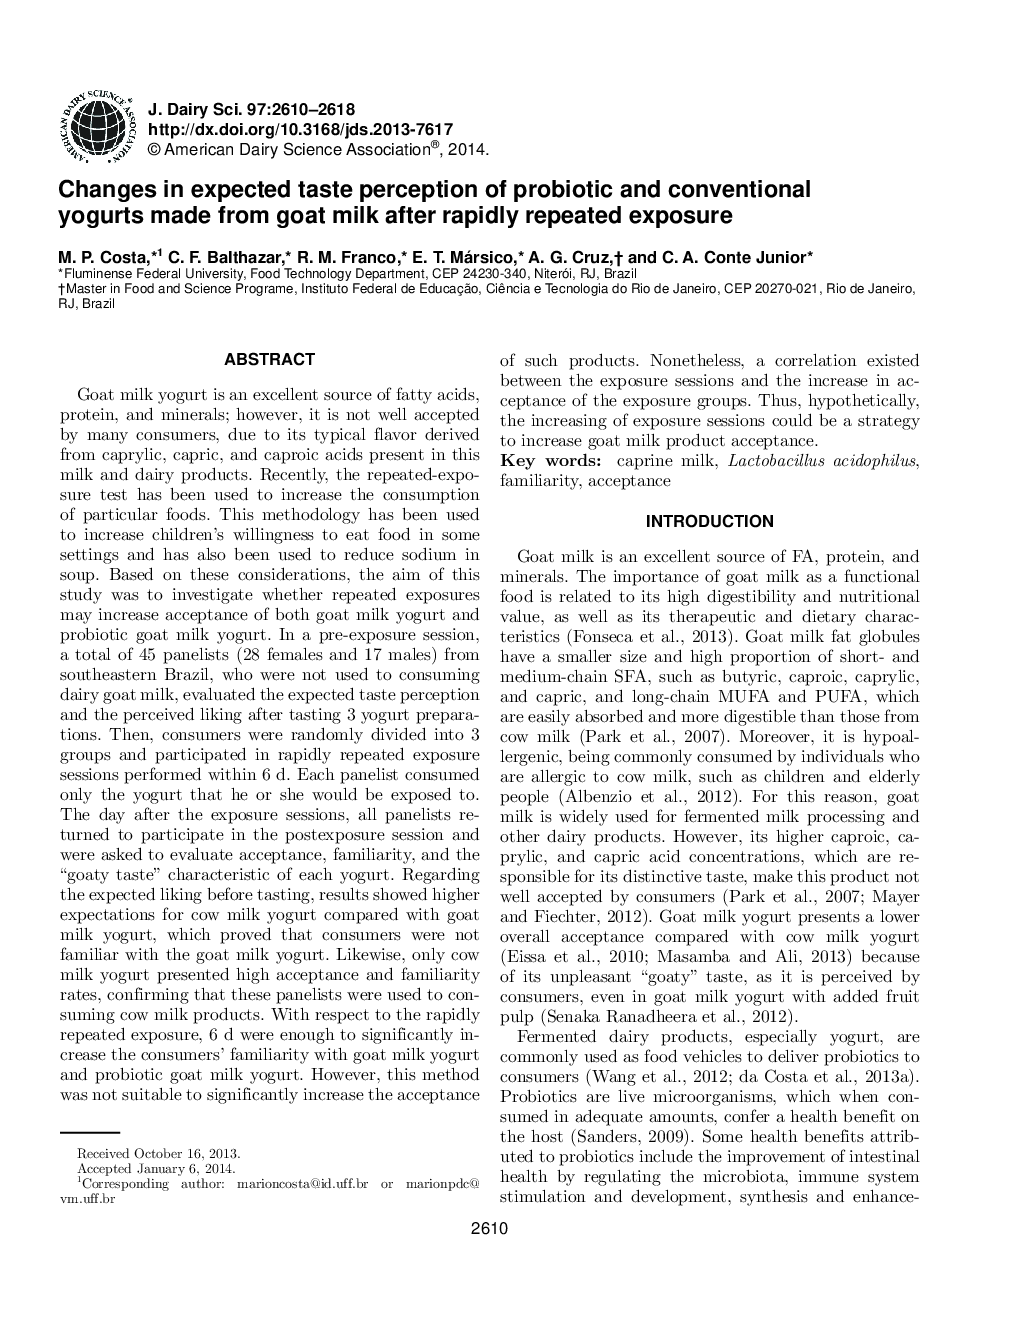 Changes on expected taste perception of probiotic and conventional yogurts made from goat milk after rapidly repeated exposure